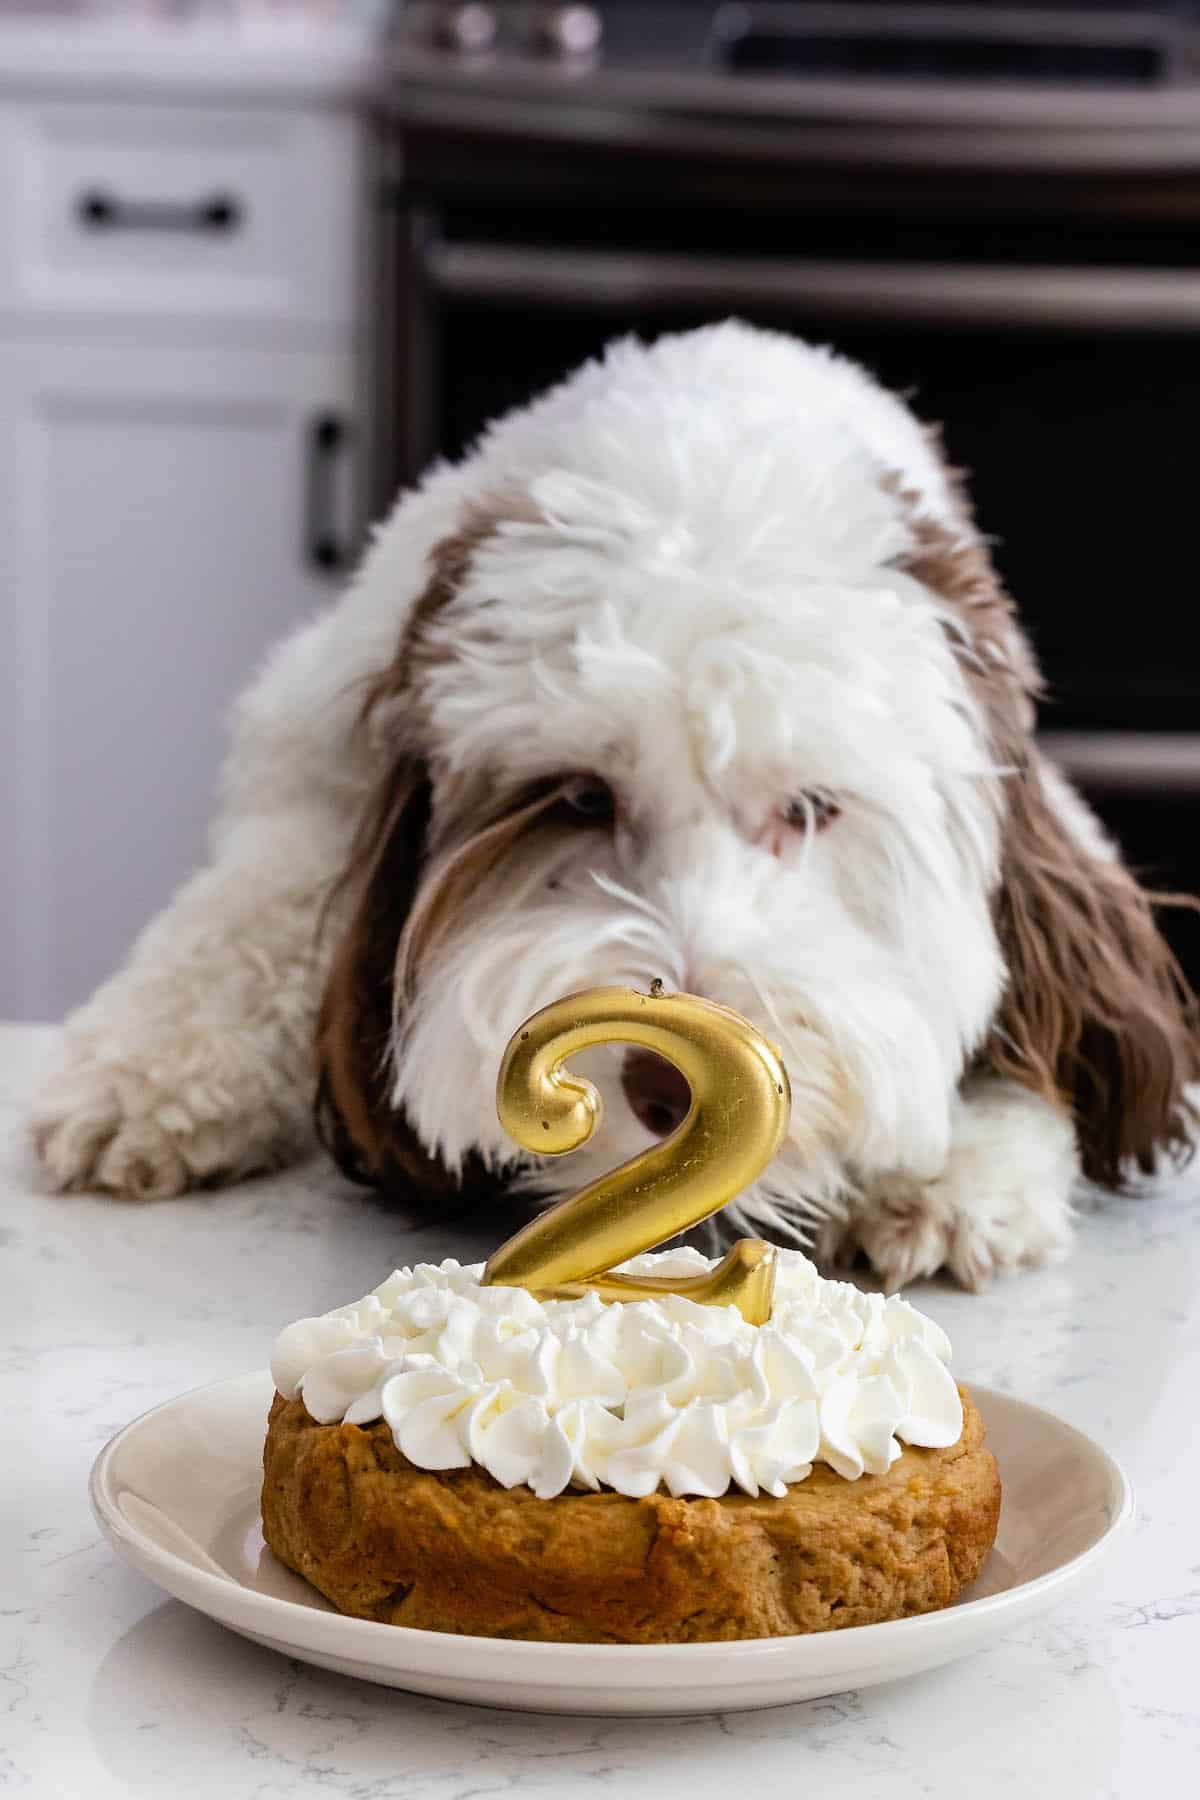 dog sniffing cake with whipped cream frosting and a 2 shaped candle.